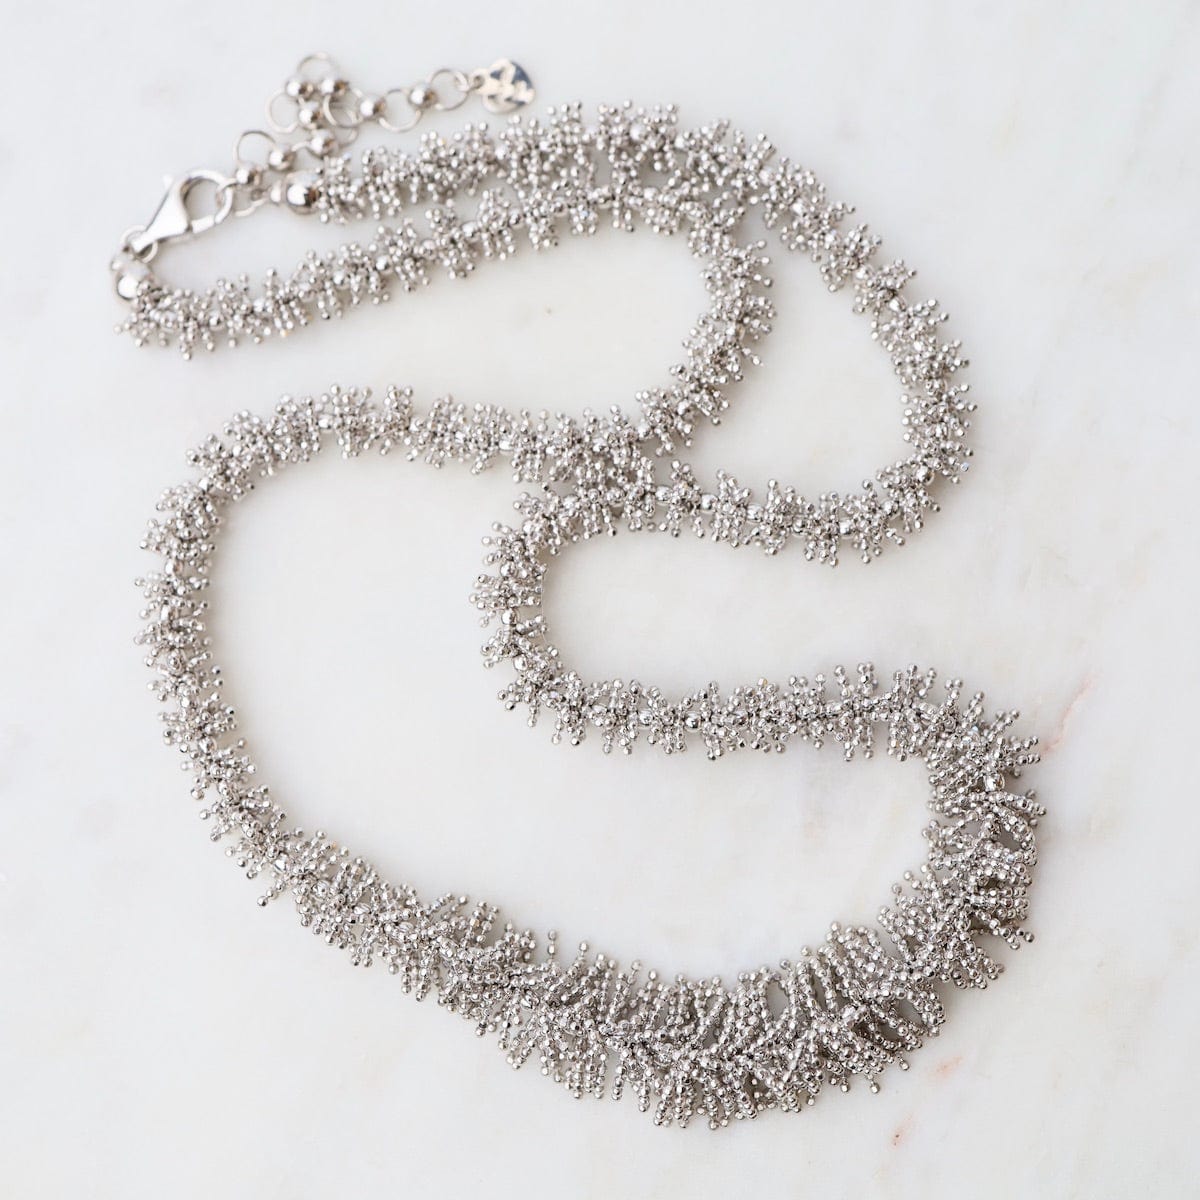 NKL Graduated Fuzzy Necklace